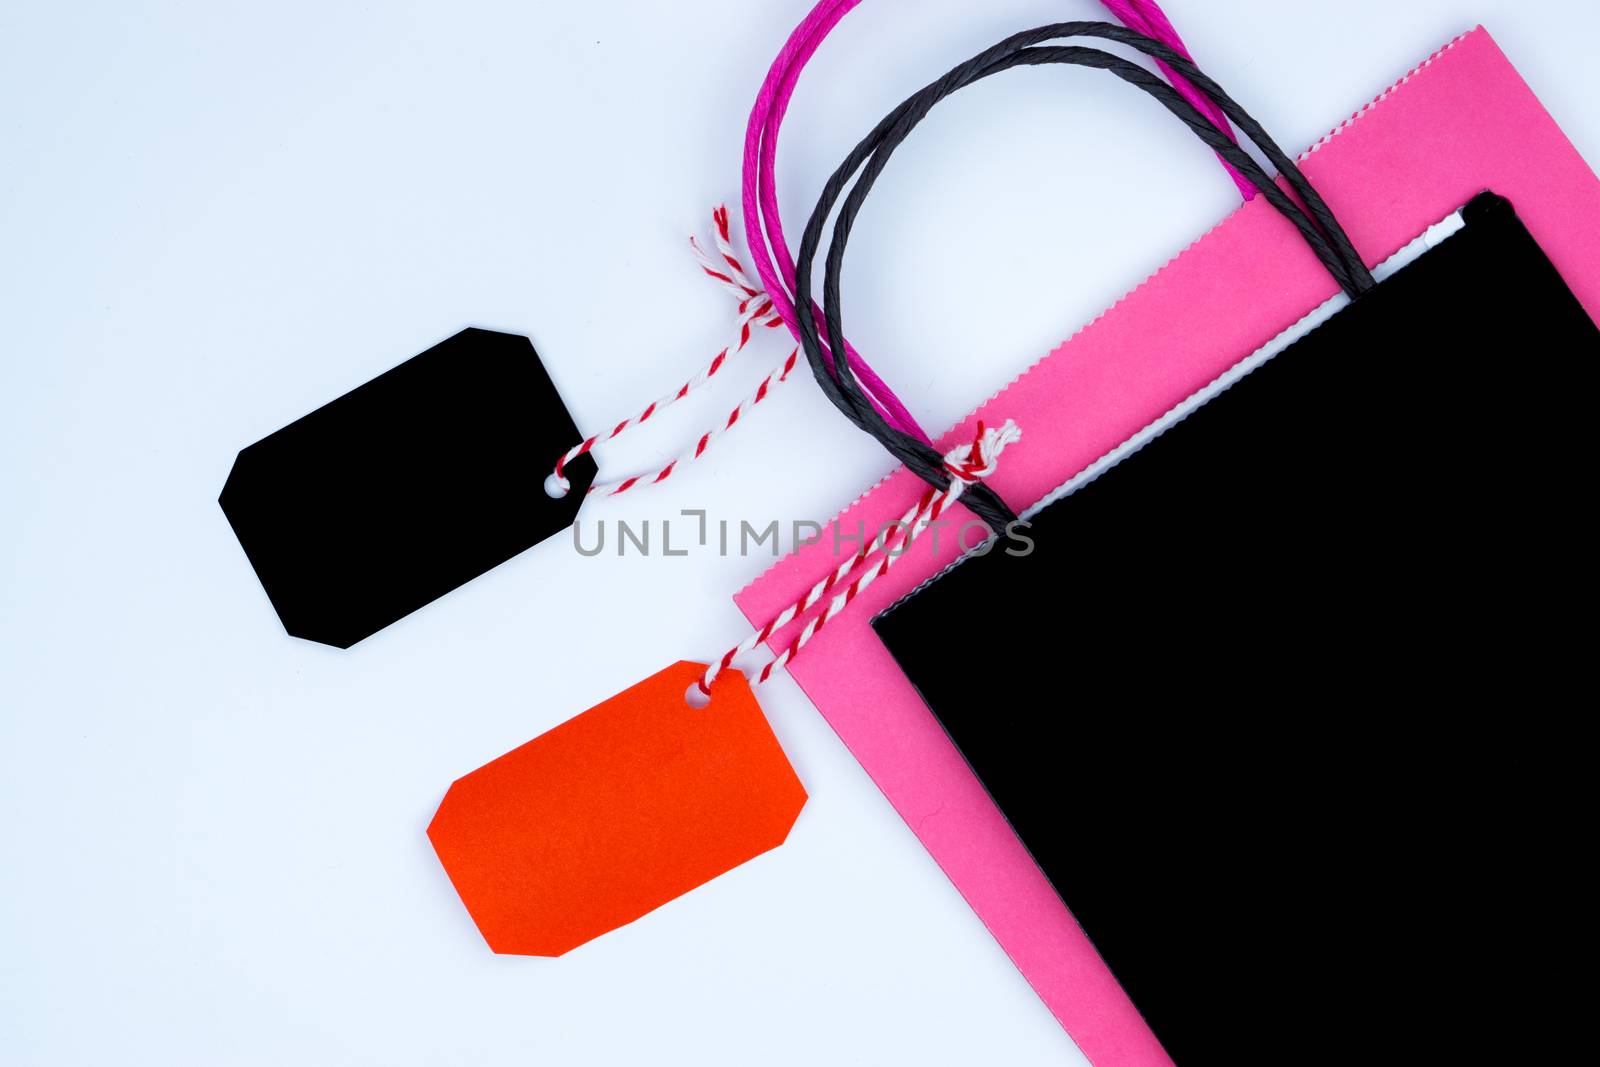 Online shopping of China, The shopping bag and tag sale on a white background with copy space for text. 11.11 single's day sale concept